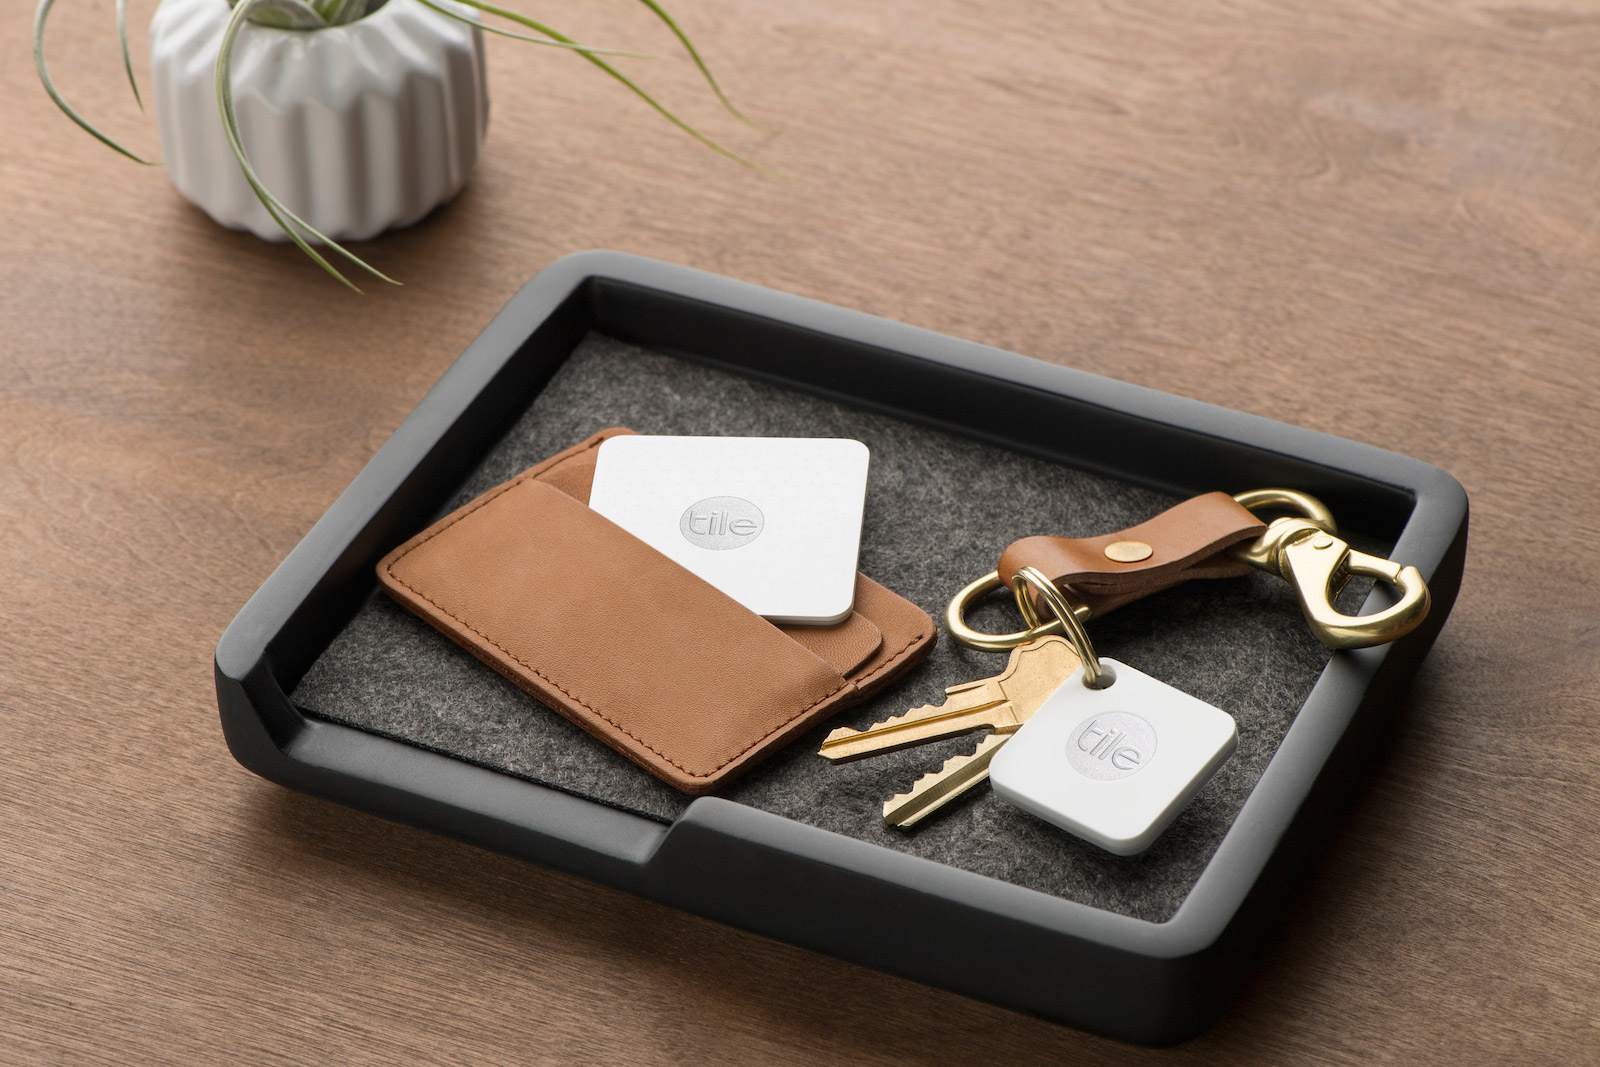 Mate is a thinner, lighter version of Tile's original Bluetooth tracker